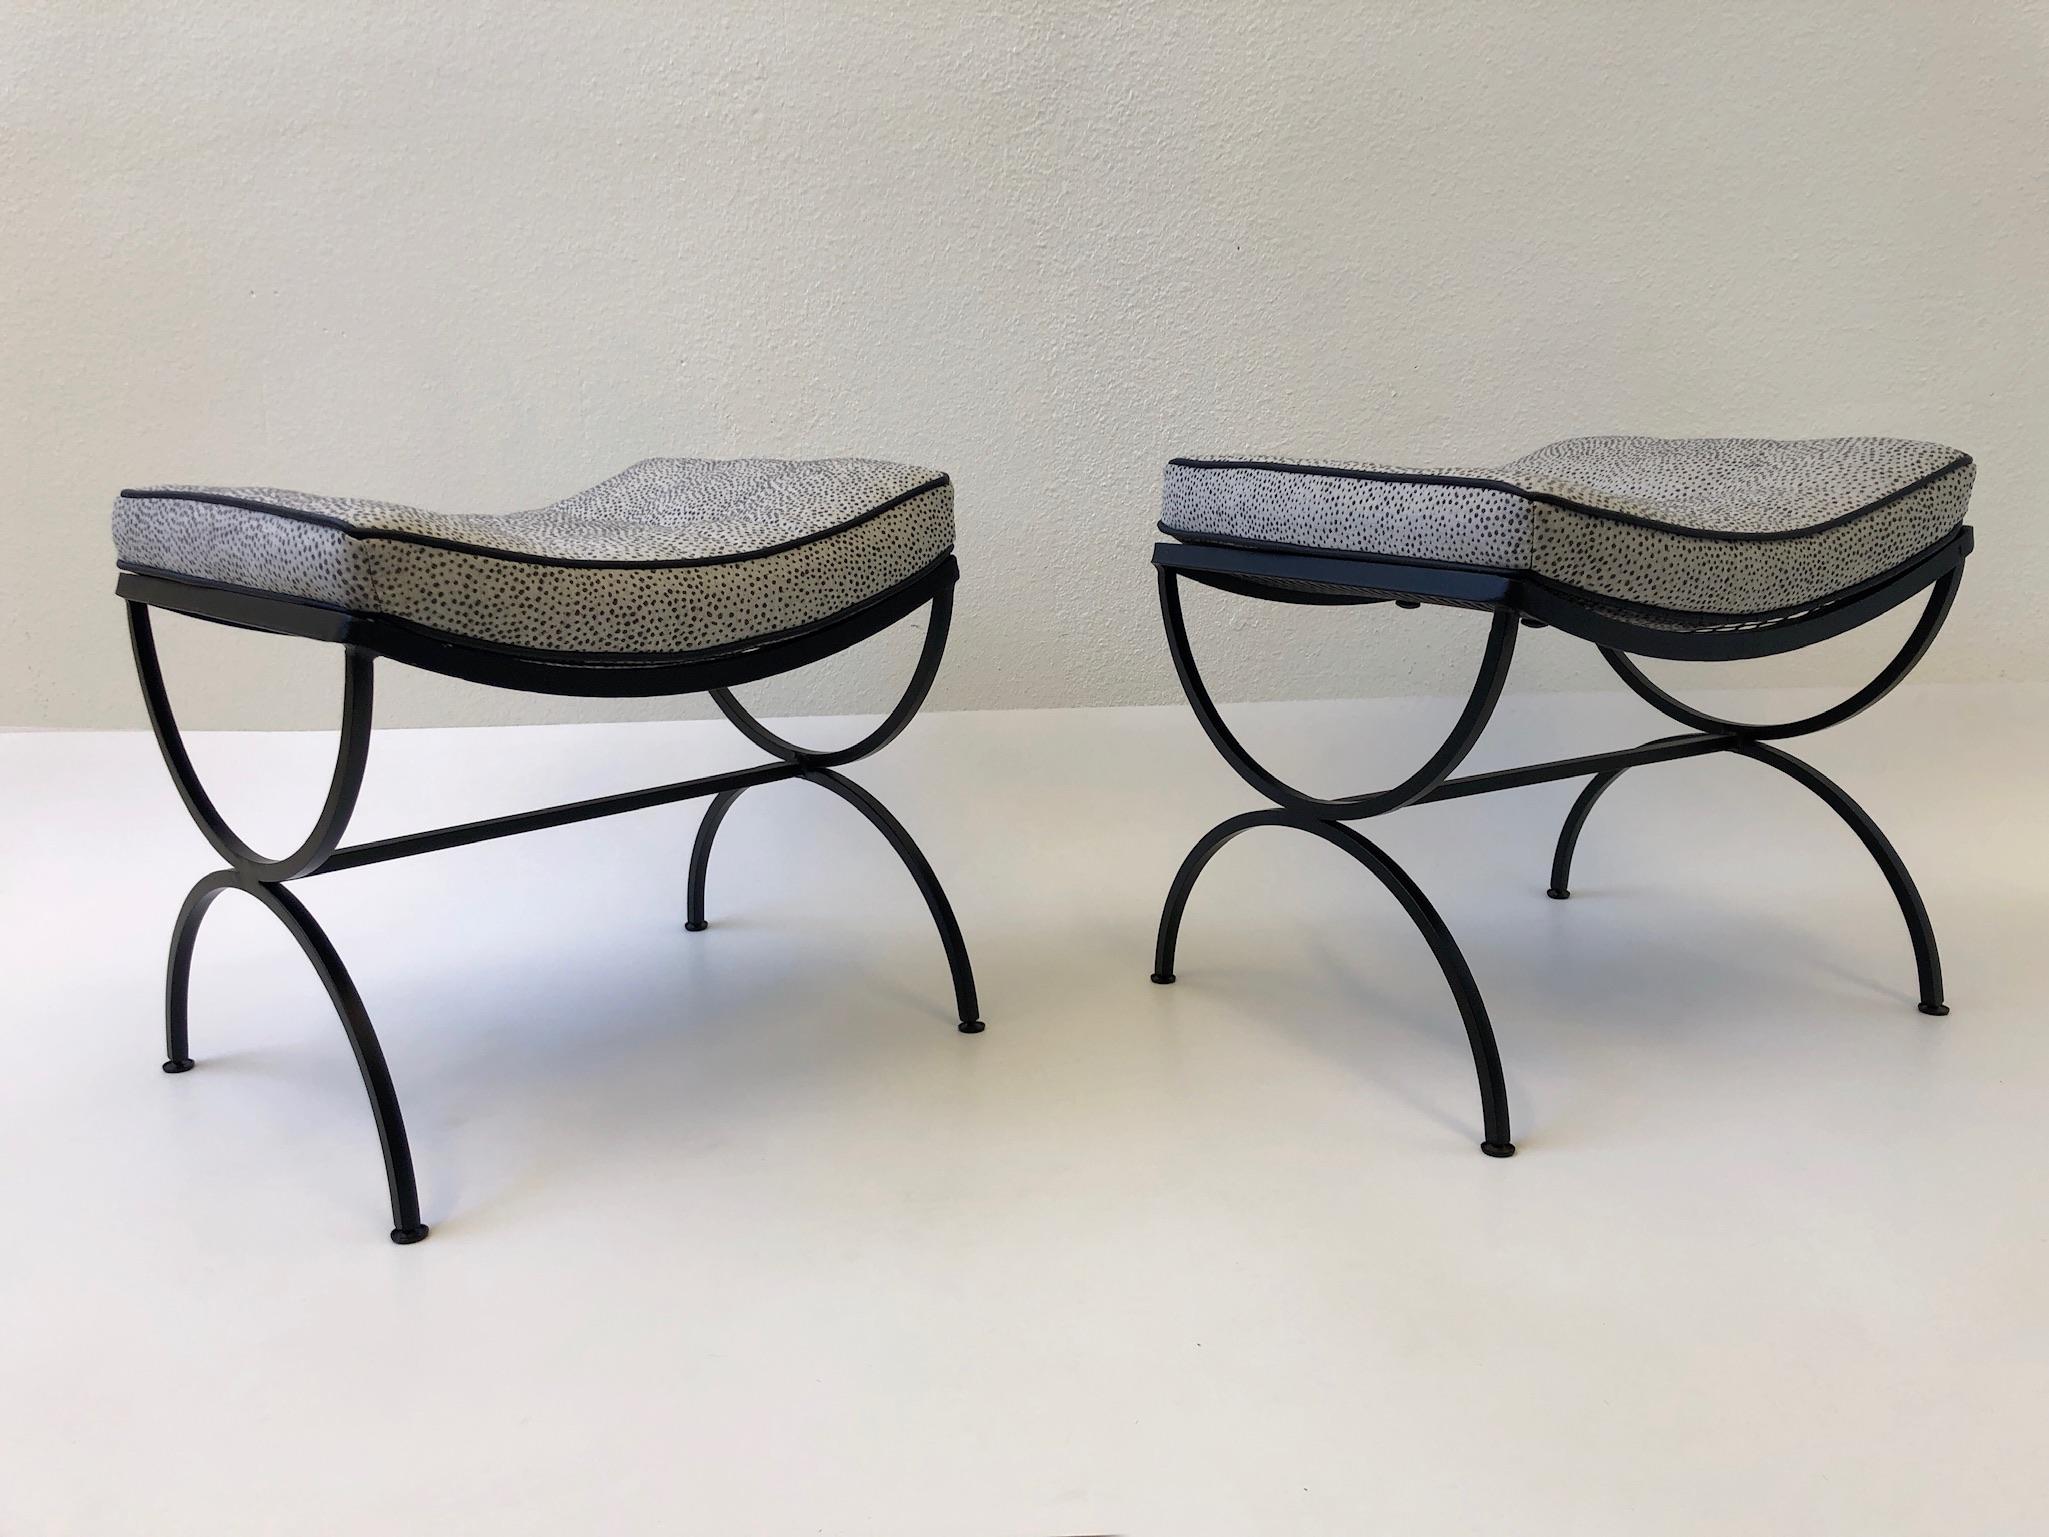 A pair of 1960s black powder coated steel “Sculptura” ottomans by Woodard. The ottoman have been newly powder coated flat black. The new cushions are Sunbrella with black vinyl pippin (see detail photos). 

Dimensions: 20” wide, 17” deep, 18” deep.